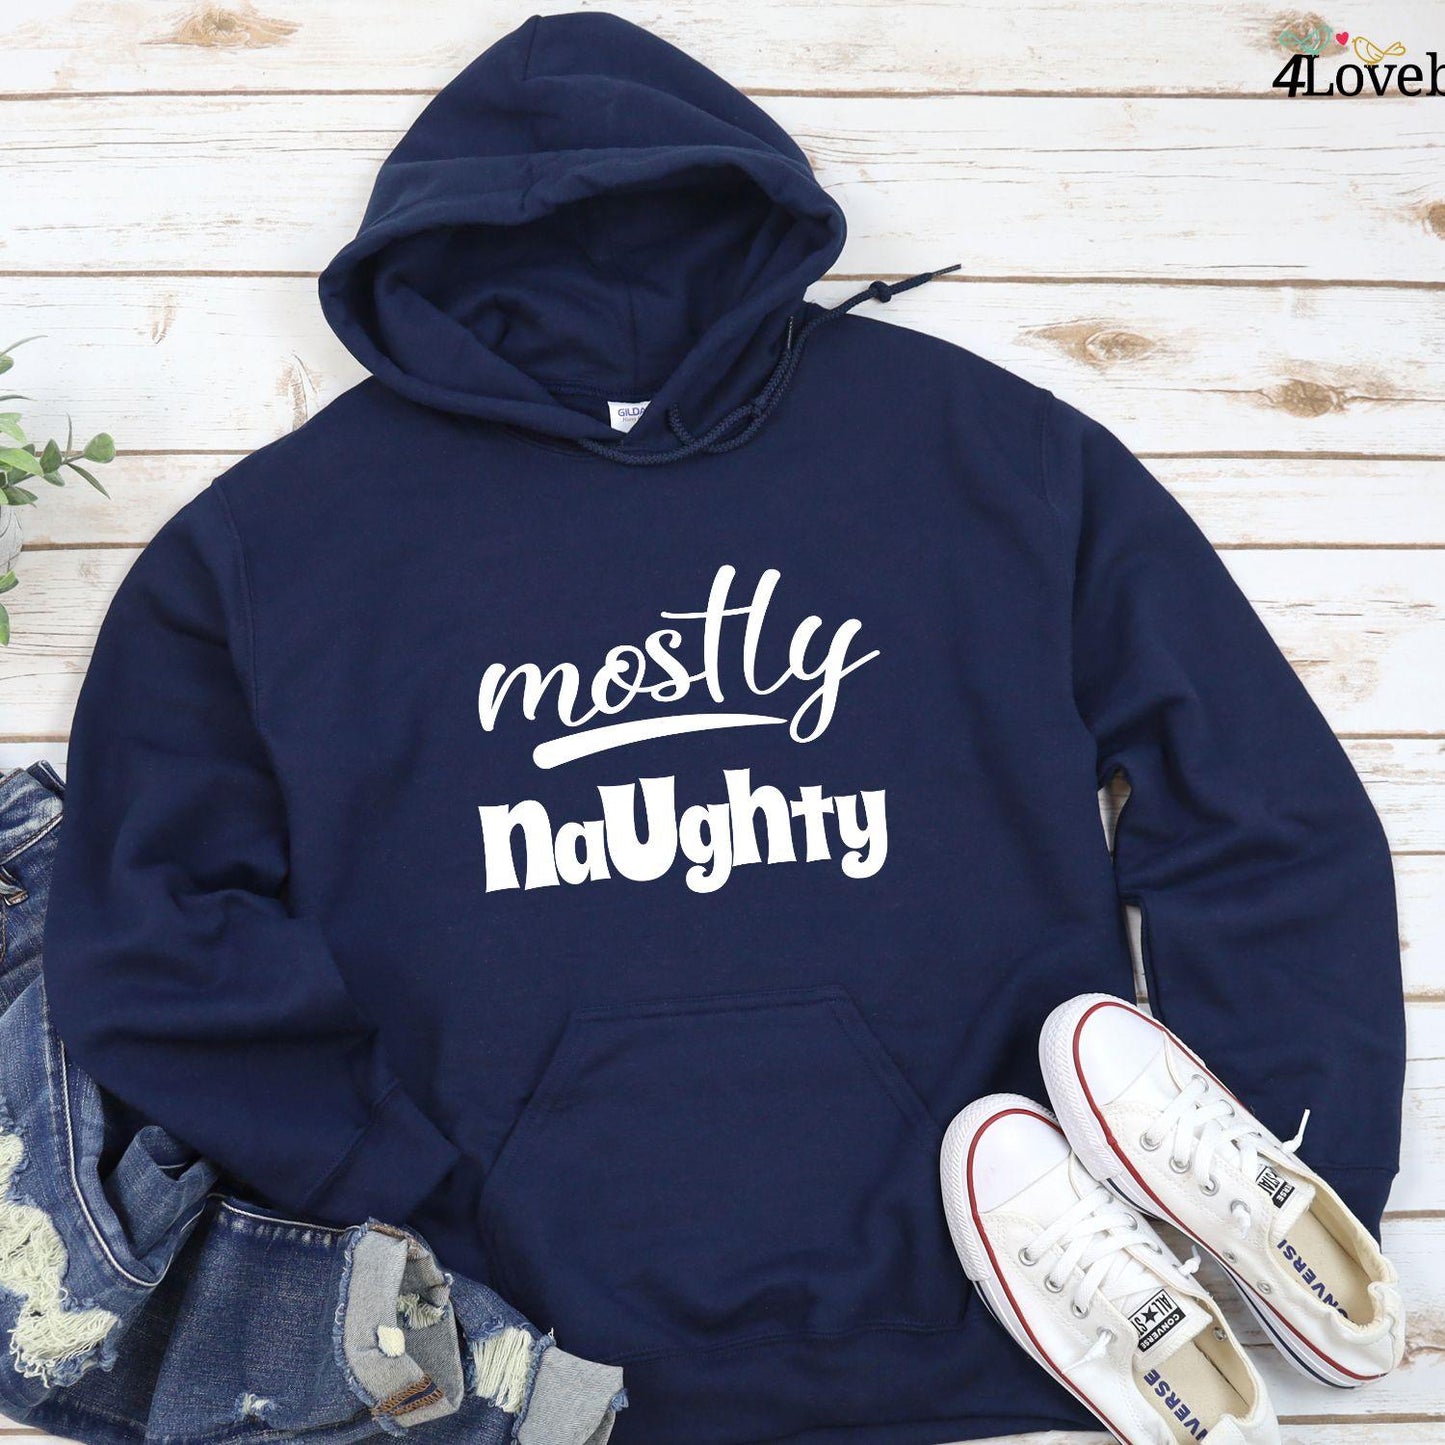 Matching Christmas Outfits For Couples: Mostly Naughty & Somewhat Nice! - 4Lovebirds